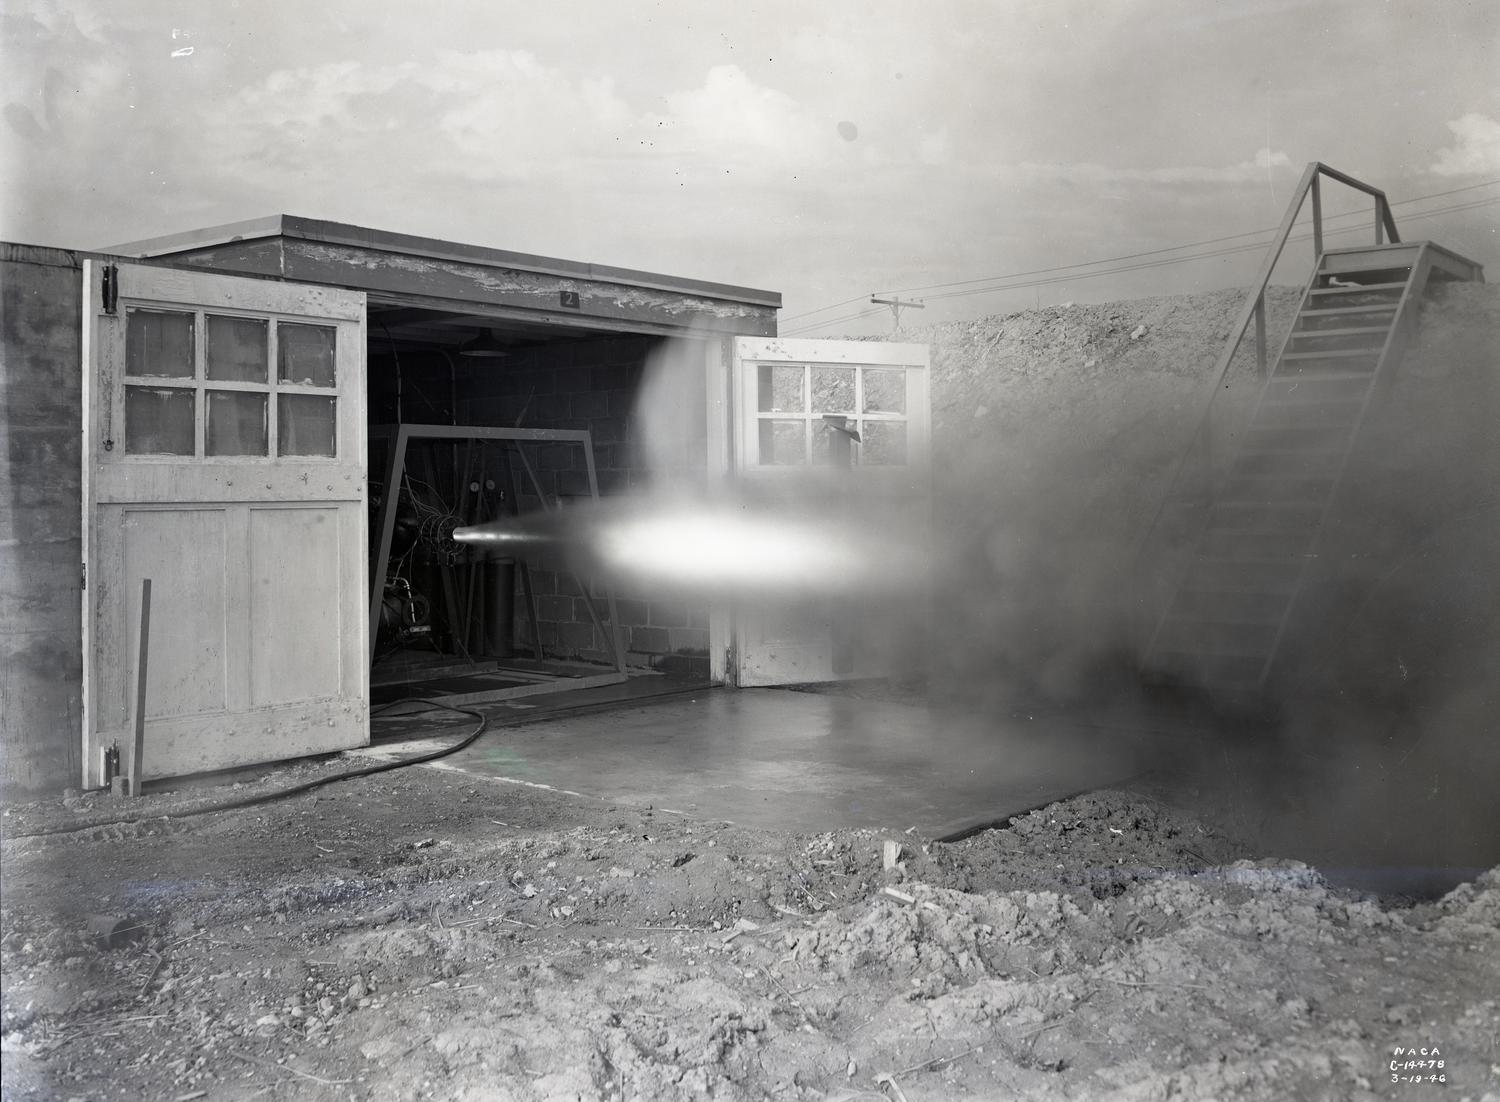 Rocket engine plume of fire and smoke blows out of old shed.